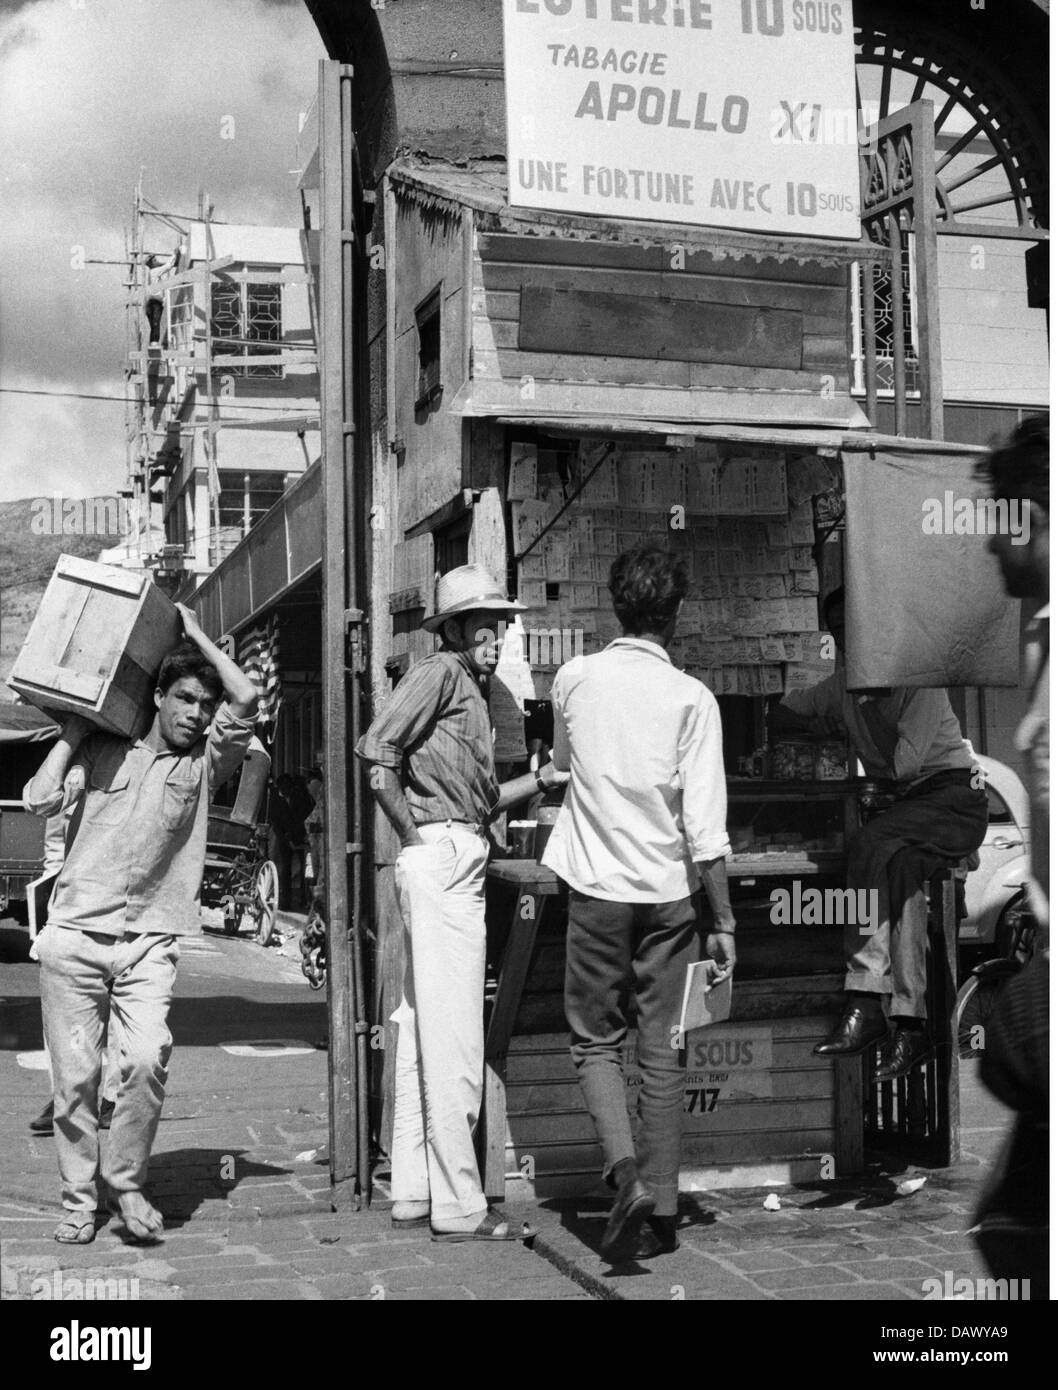 geography / travel, Mauritius, Port Louis, street scene, lottery booth in a shopping street, 1960s, 60s, 20th century, historic, historical, store, stores, shop, shops, trade, dealer, dealers, street scene, street scenes, pedestrian, pedestrians, passer-by, passerby, passers-by, old town, historic city centre, historic city center, inner city, midtown, city centre, town centre, urban core, lottery, lotteries, do the lottery, game of chance, games of chance, stall, huckster, hucksters, street vendor, lottery tickets, batch, people, Additional-Rights-Clearences-Not Available Stock Photo